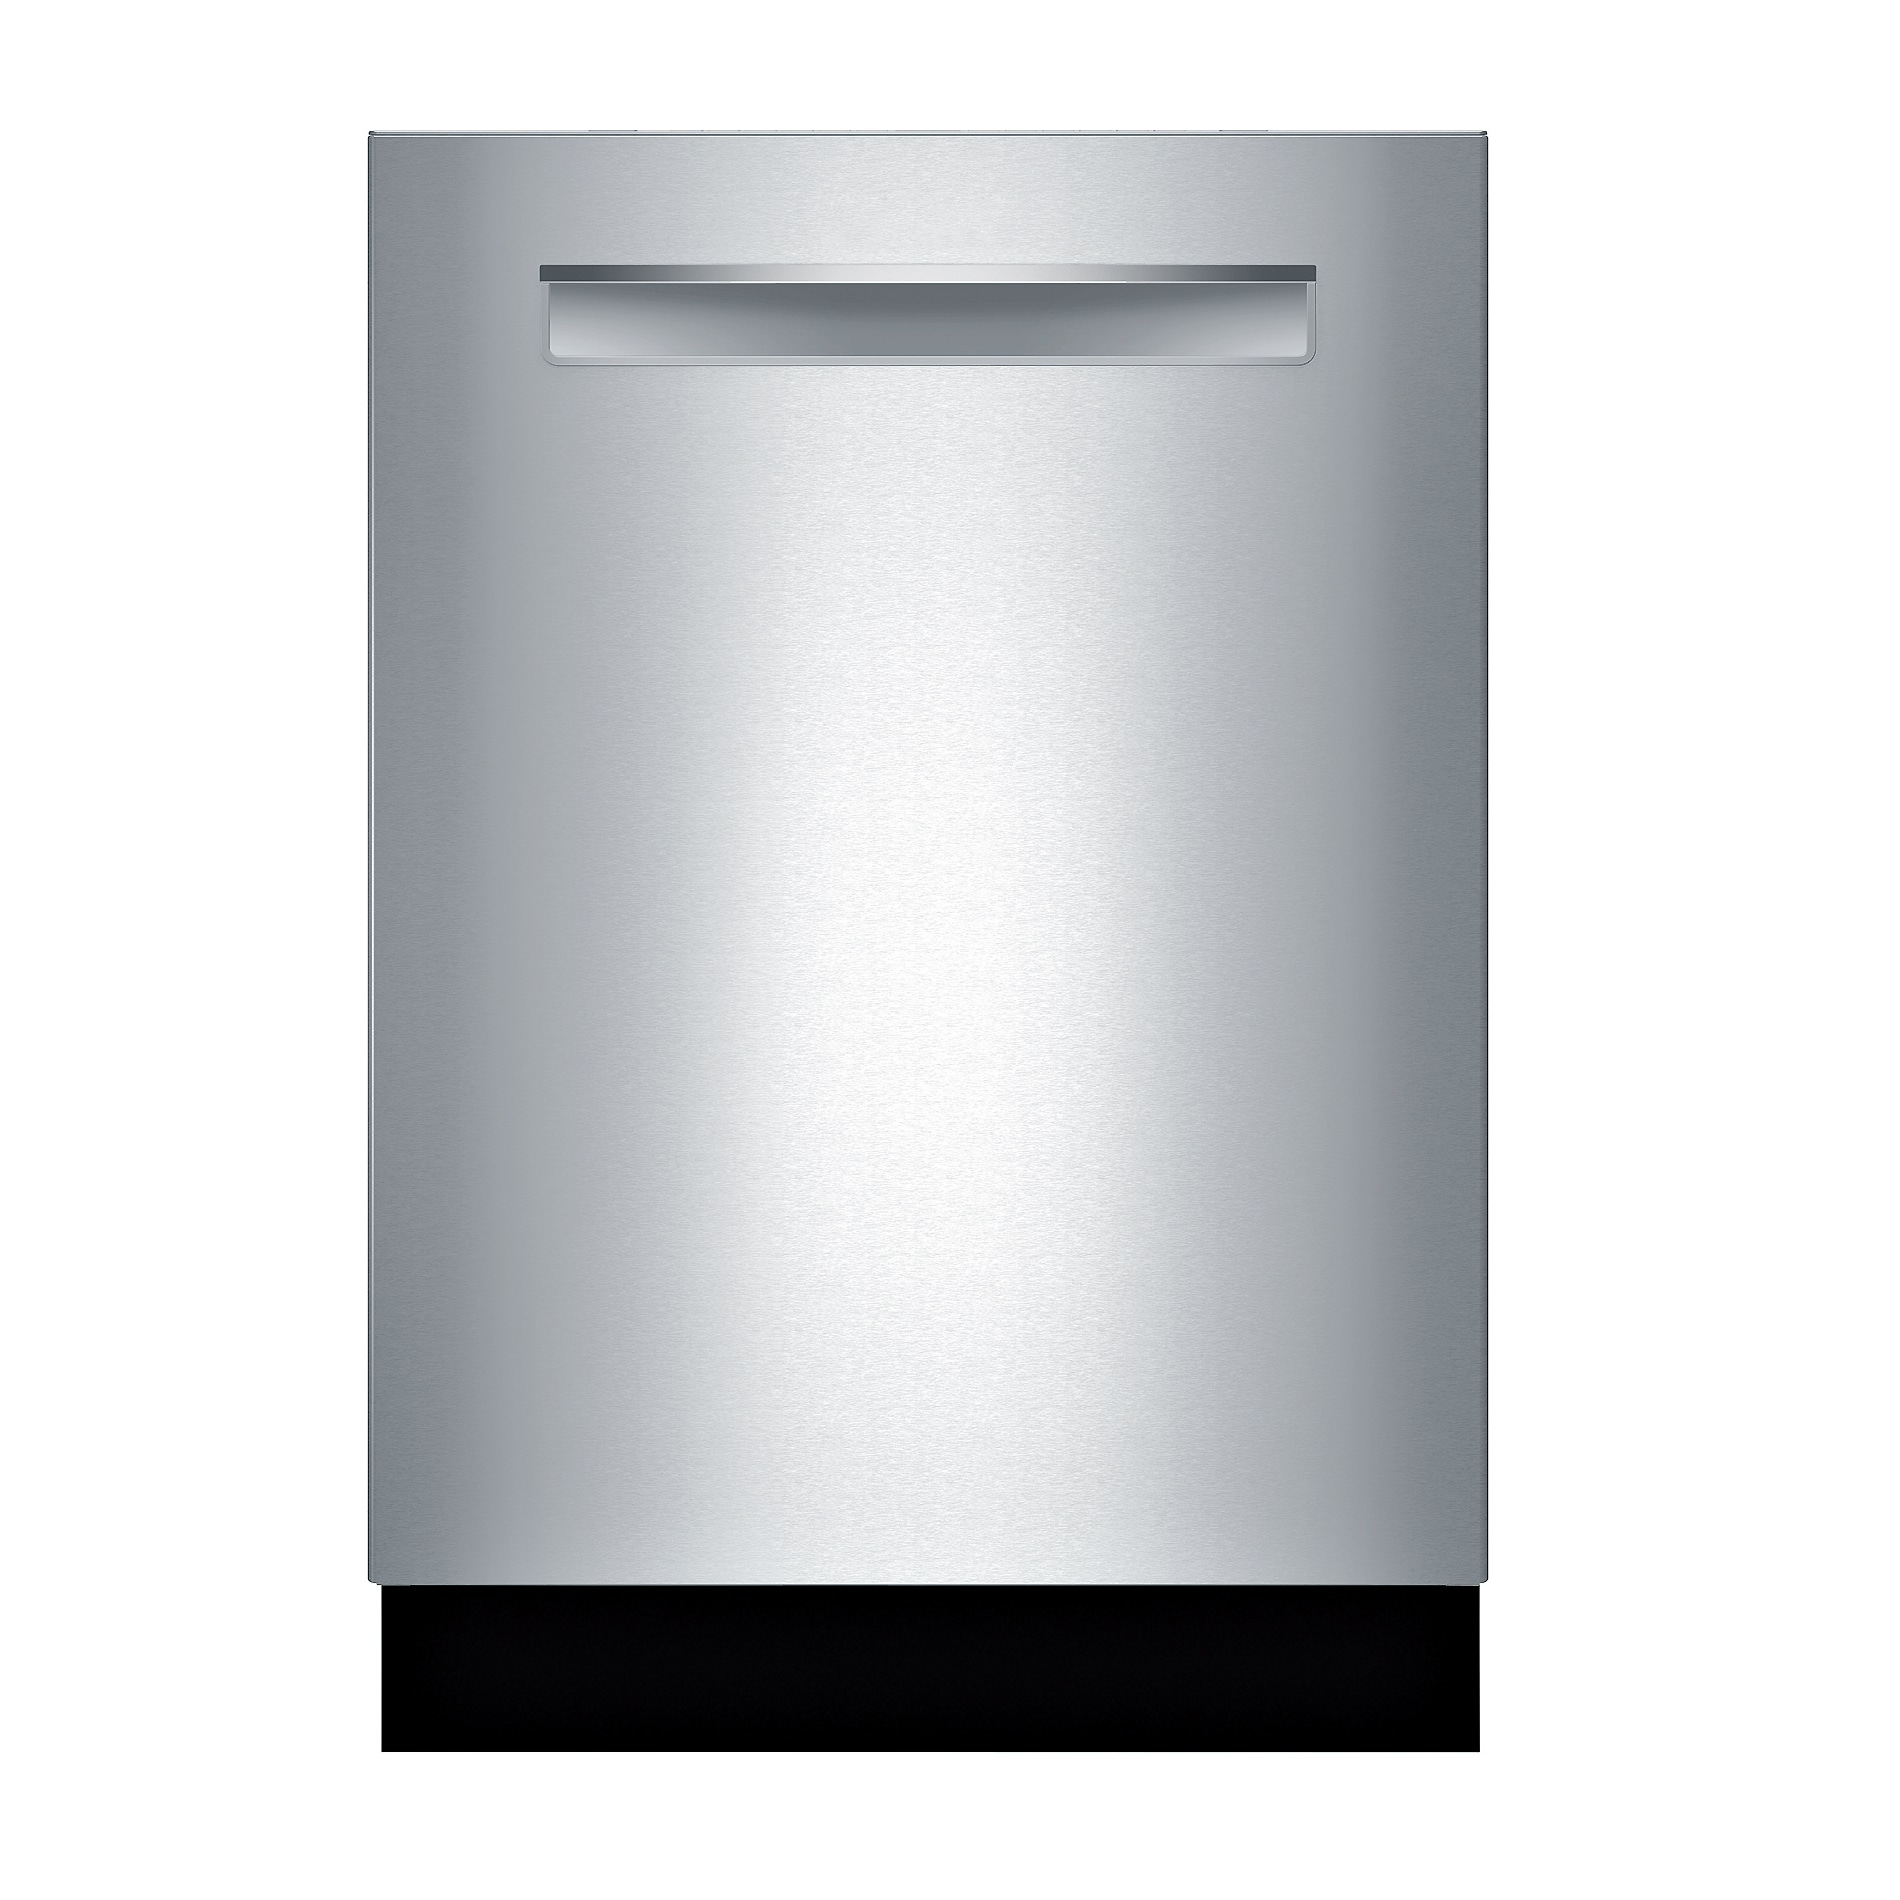 Bosch 500 Series Top Control 24-in Built-In Dishwasher (Stainless Steel) ENERGY STAR, 44-dBA in Built-In Dishwashers department at Lowes.com